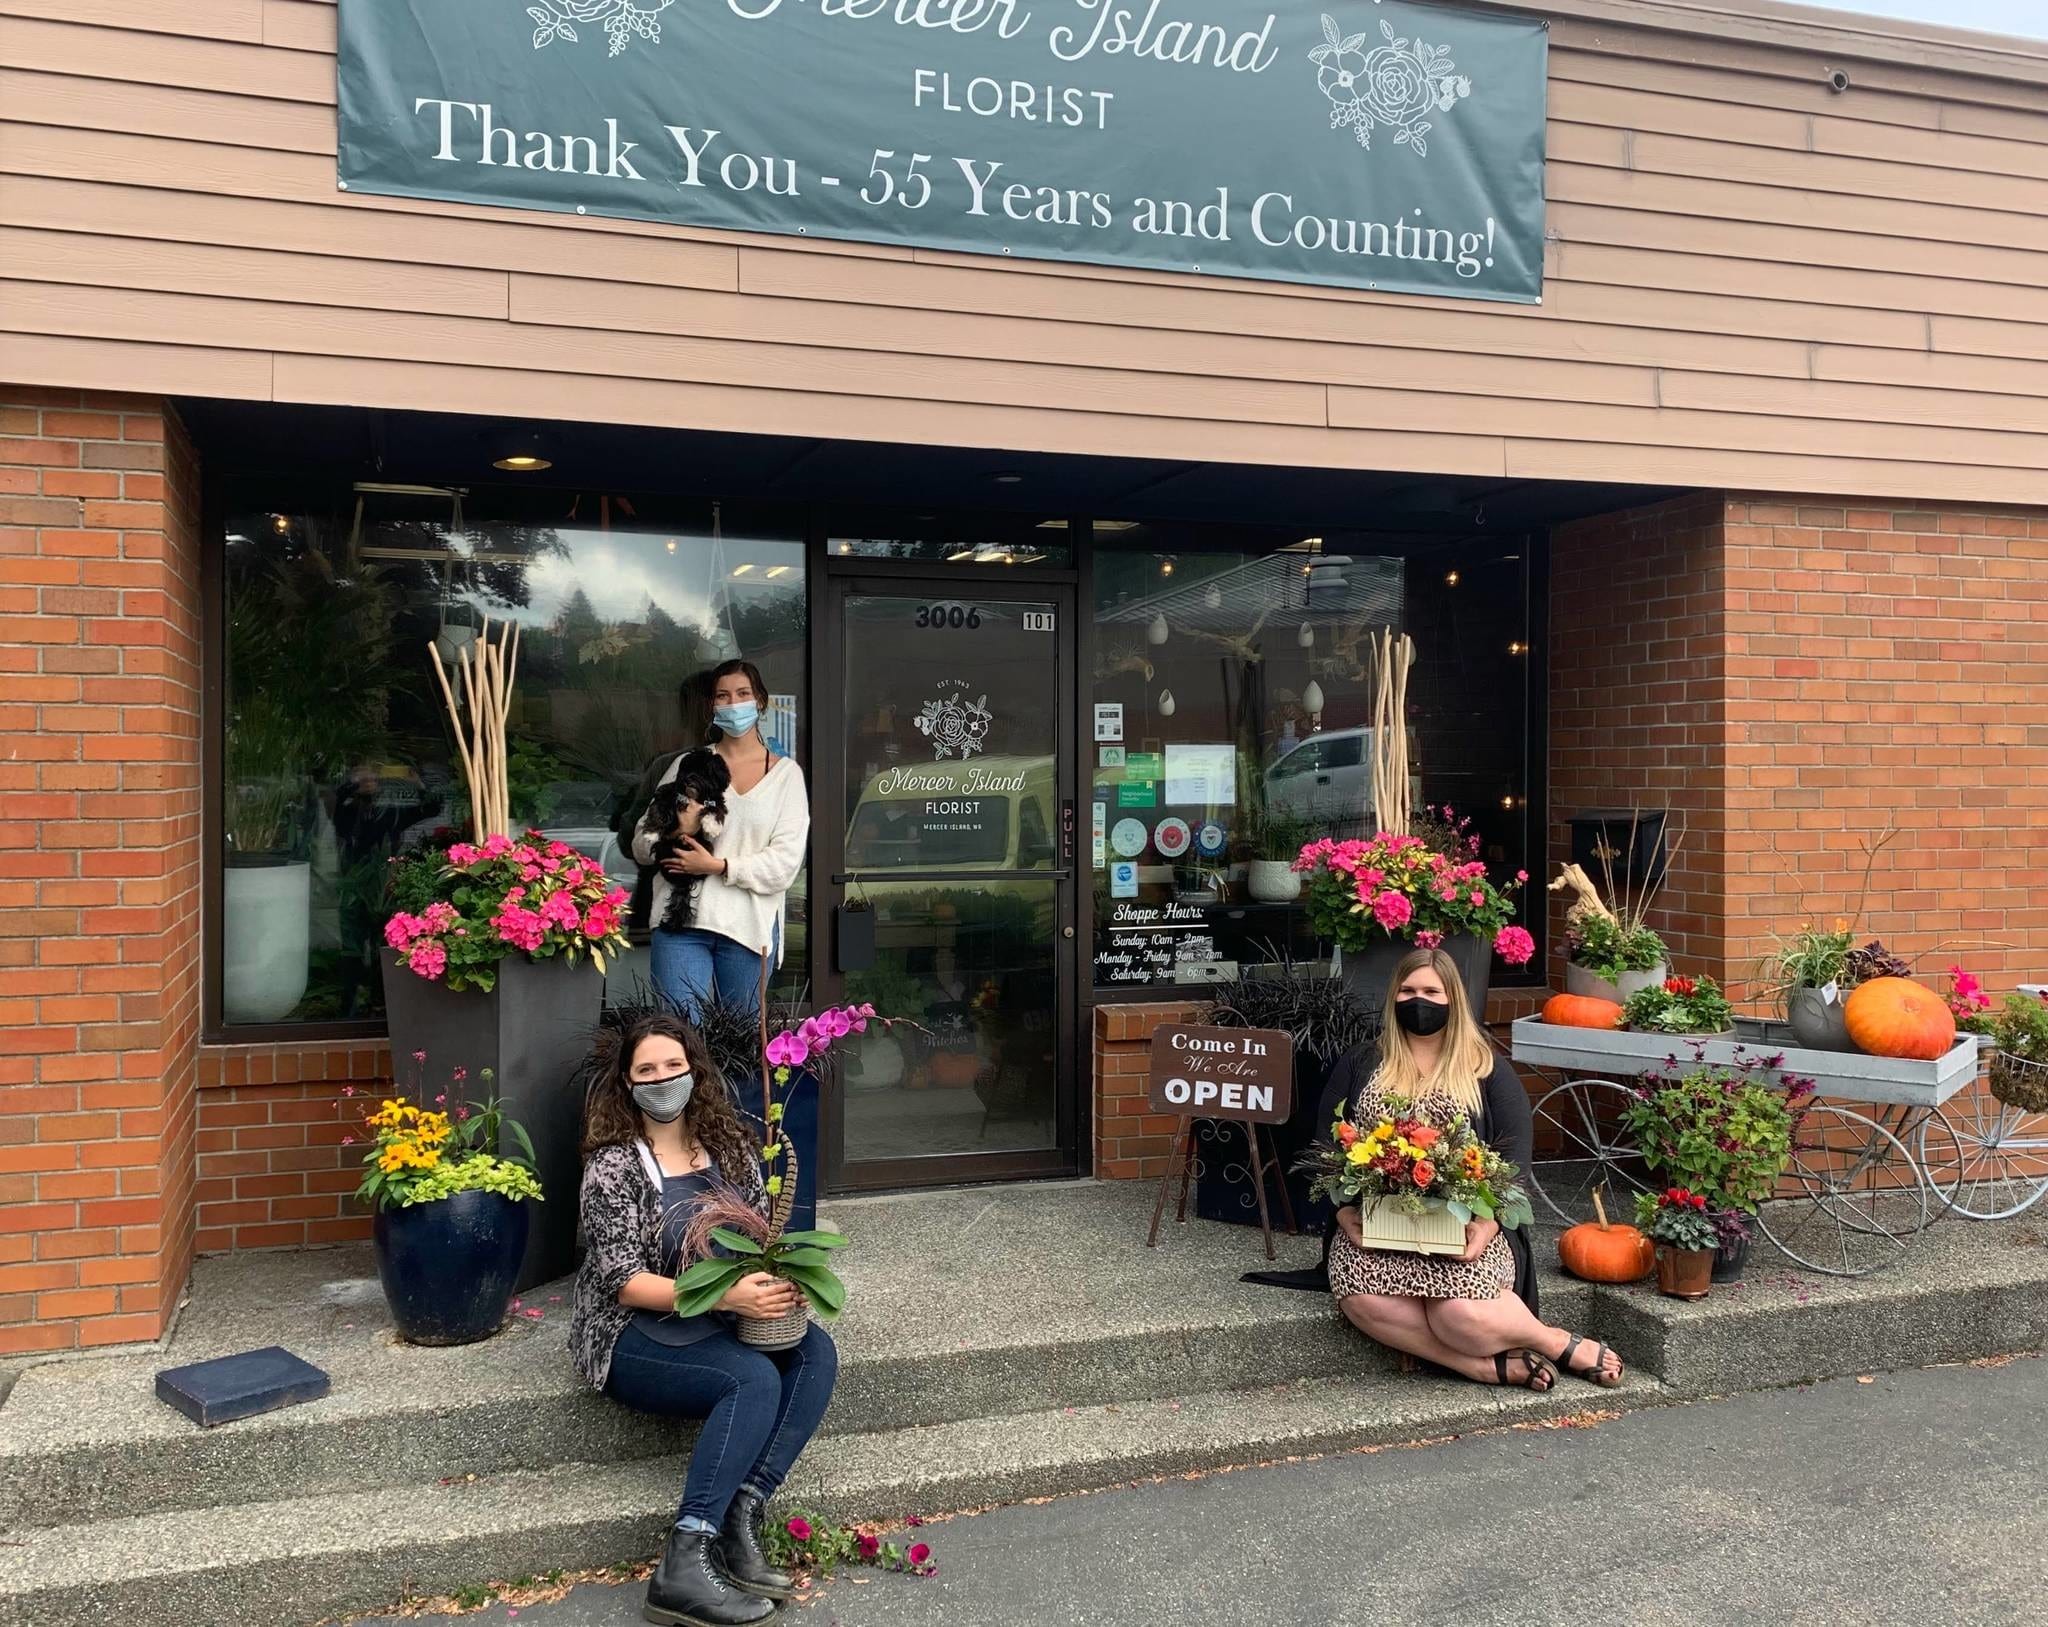 Mercer Island Florist connects with the community